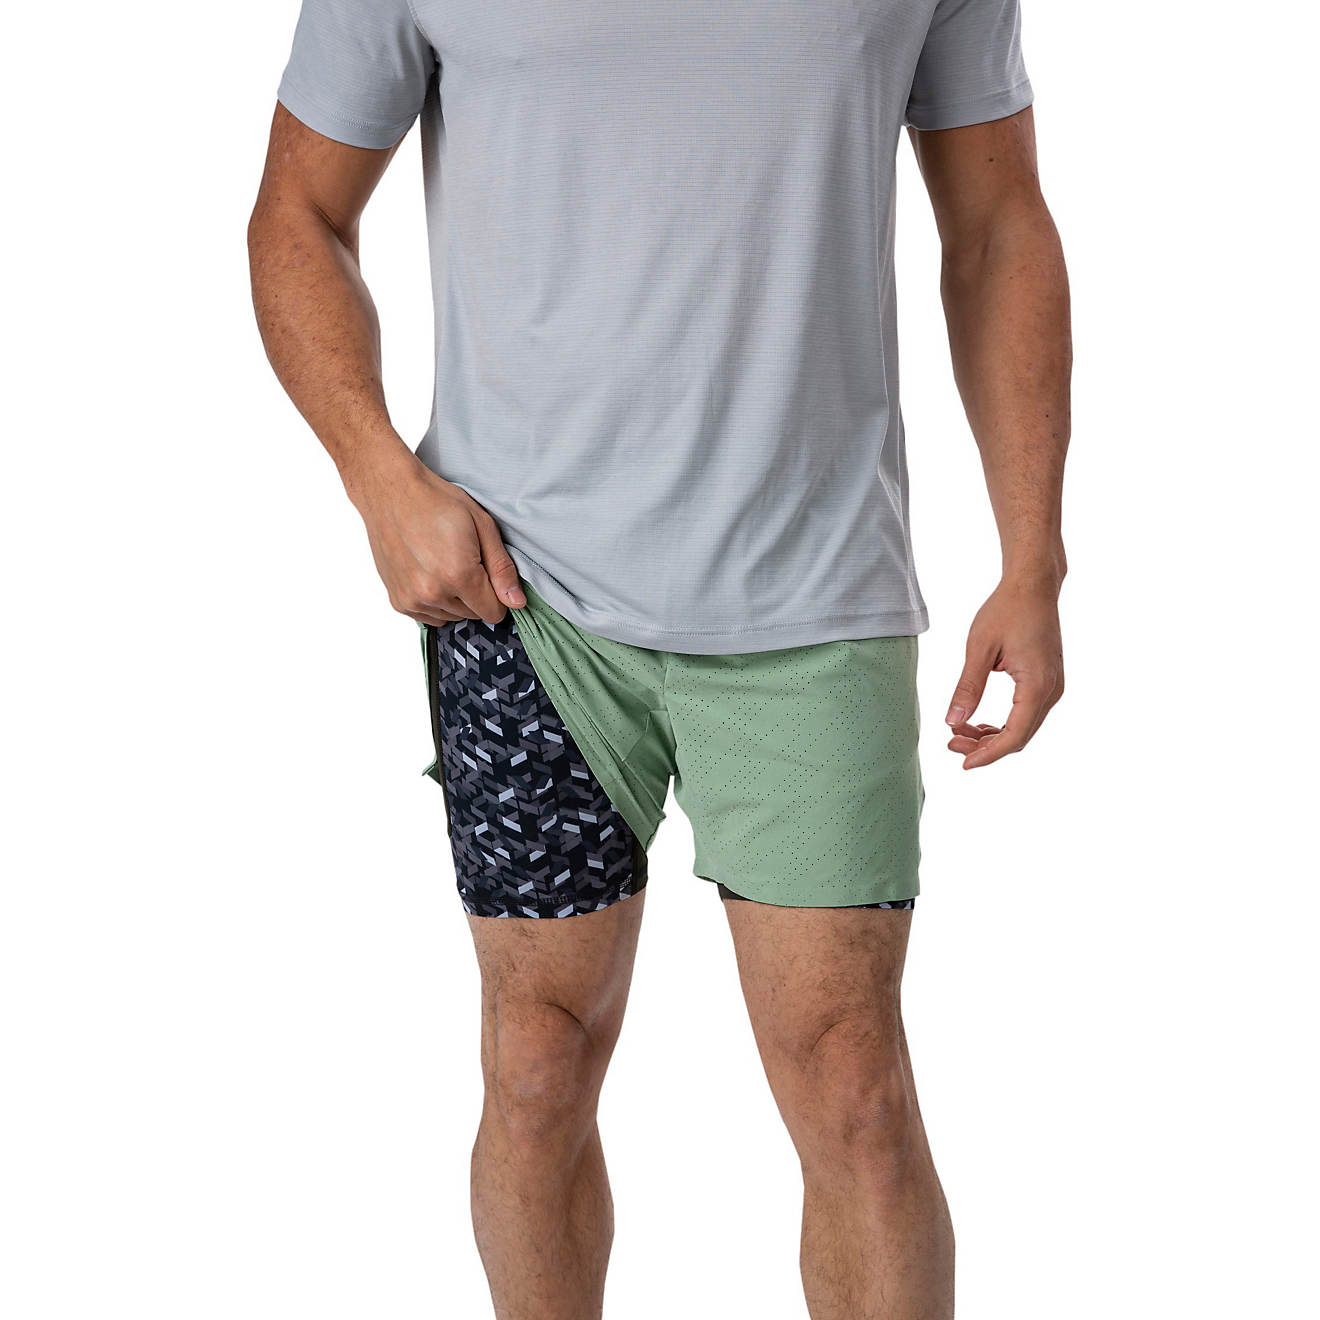 Chubbies Men's Dog Days Ultimate Training Shorts 5.5-in - view number 1